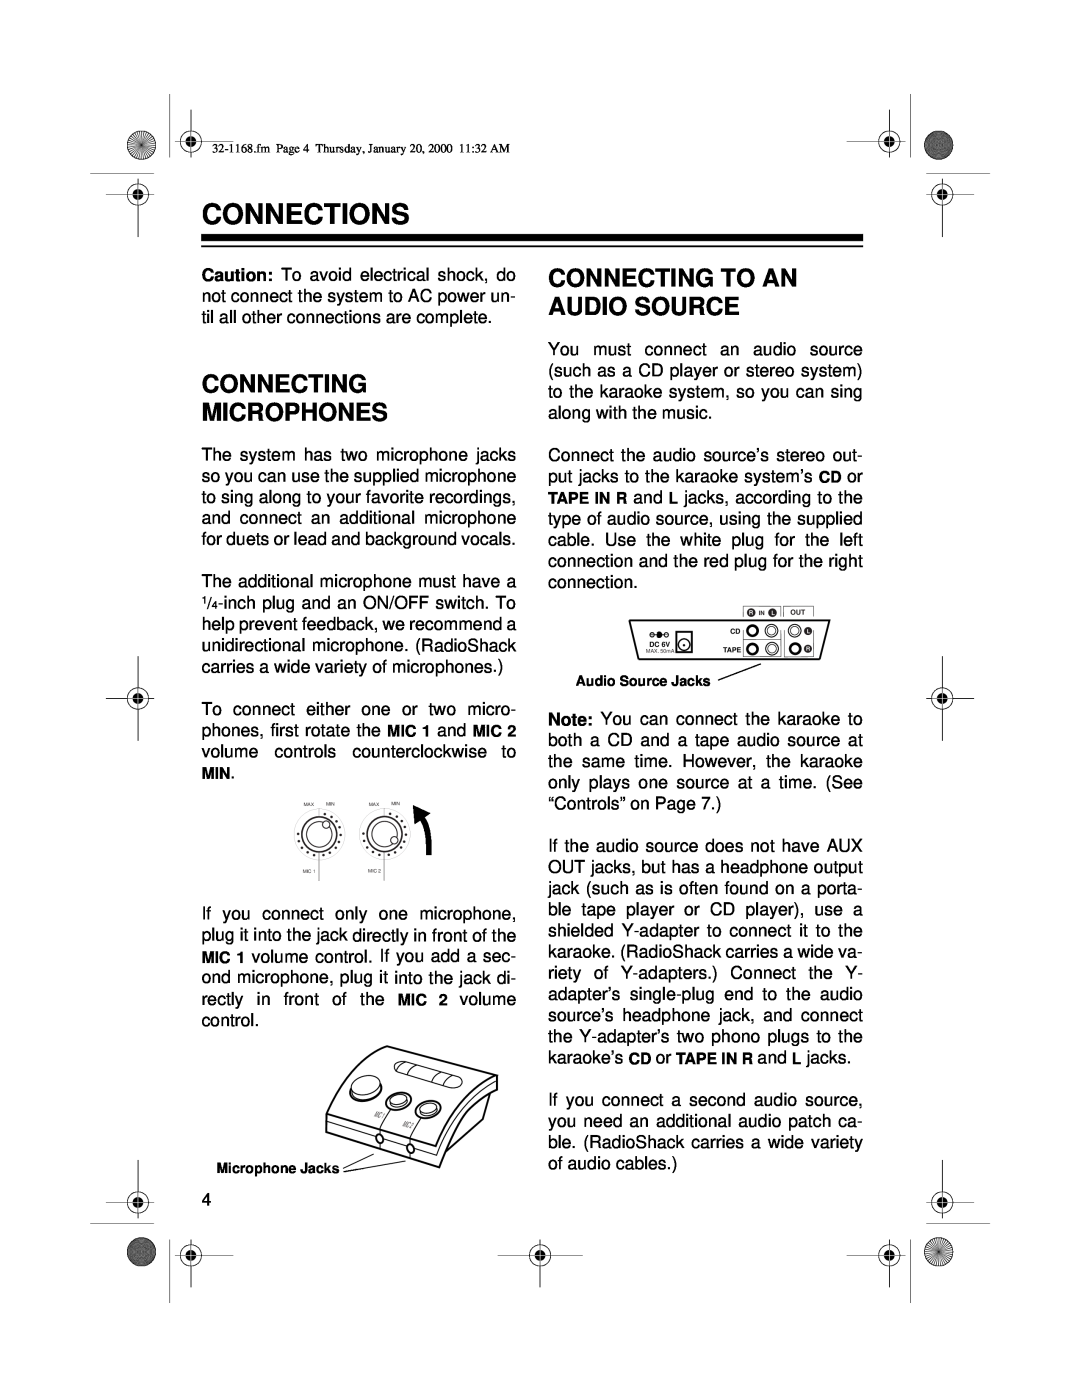 Optimus 32-1168 owner manual Connections, Connecting Microphones, Connecting To An Audio Source 